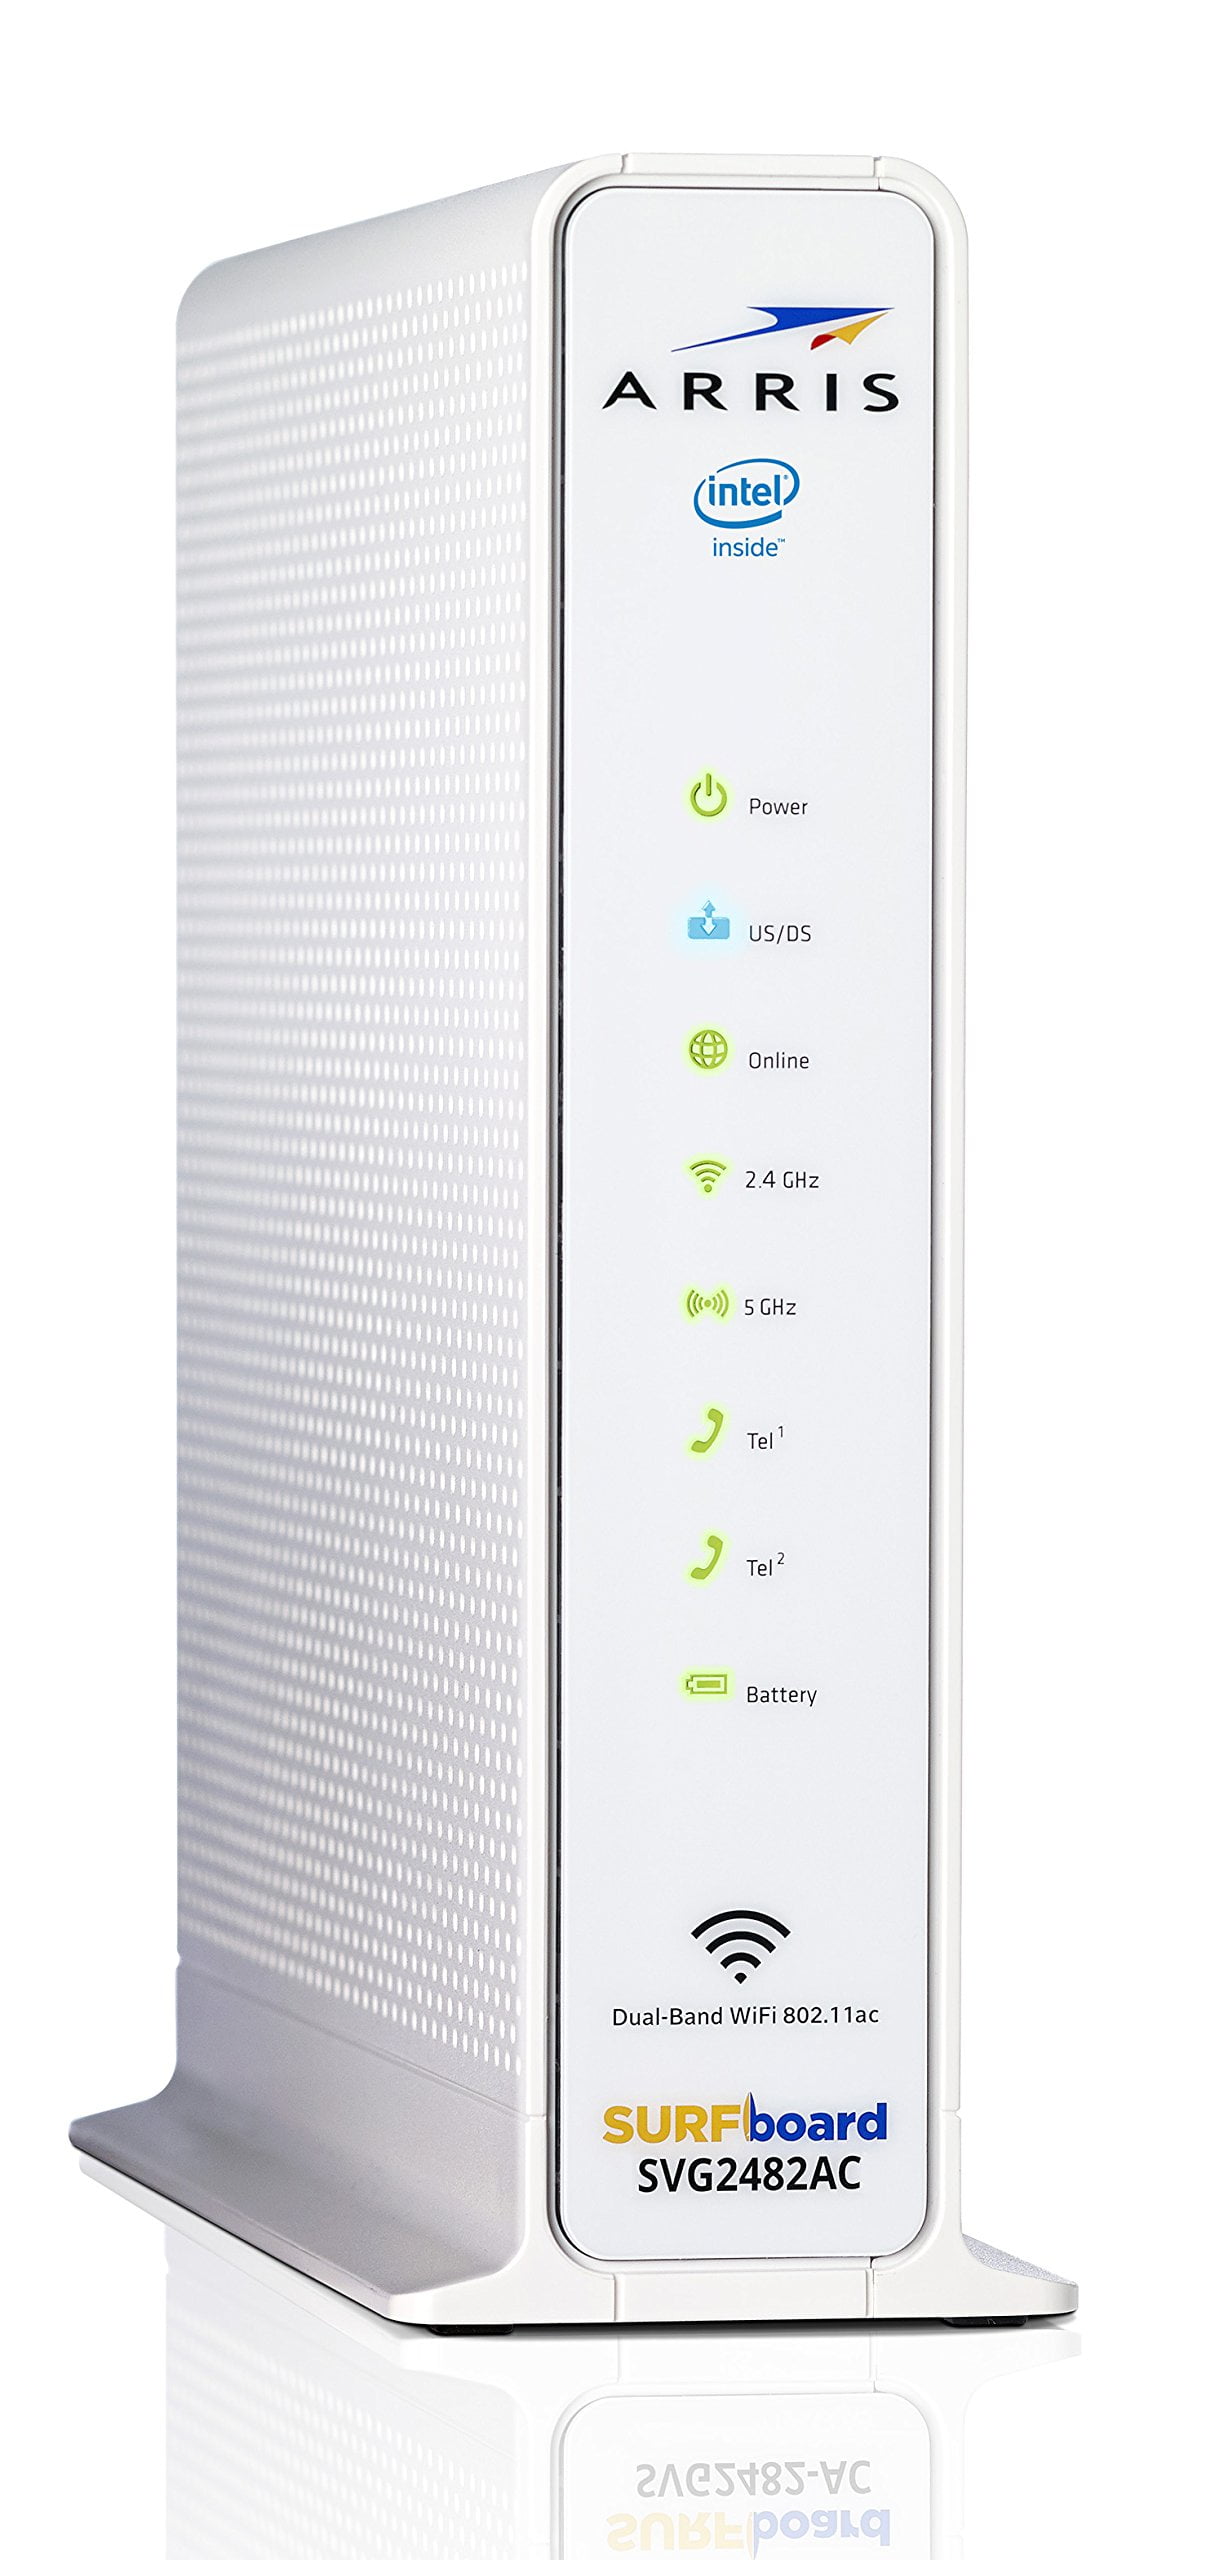 RENEWED ARRIS Surfboard Certified for Comcast Xfinity Only 24x8 Docsis 3.0 Cable Modem Plus AC1750 Dual Band Wi-Fi Router and Xfinity Telephone 